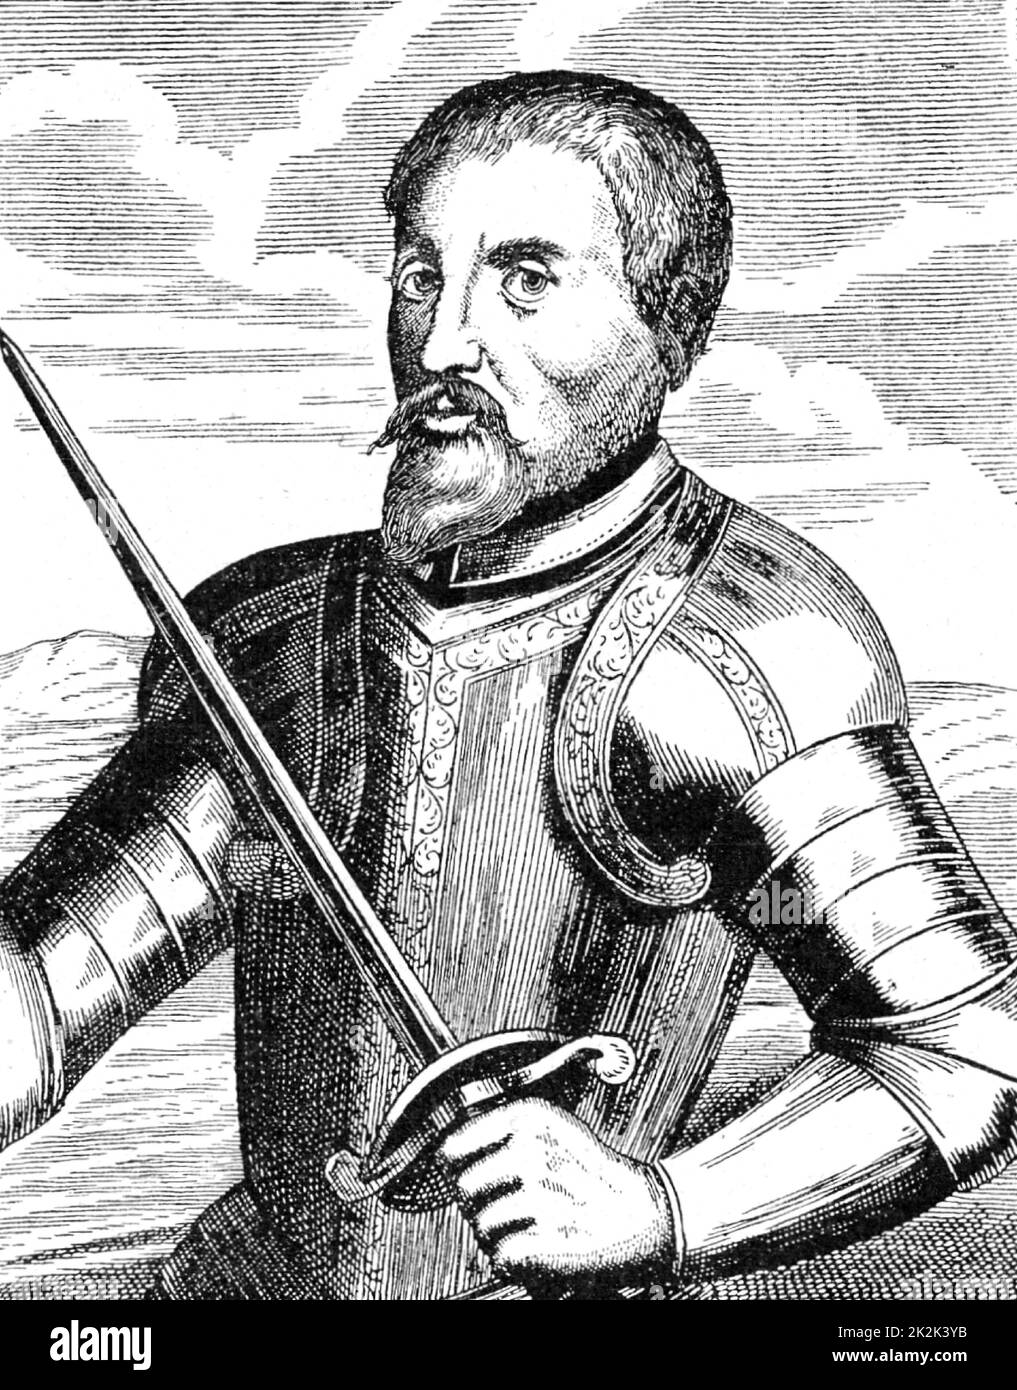 Fernando de Soto (c1496-1542) Spanish explorer and conquistador born at Xeres (Jerez) de los Caballeros, Estramadura, Spain. A member of the Spanish expedition to Darien (1518-1520), served in Nicaragua (1527) and assisted Pizzaro in the conquest of Peru. Appointed governor of Cuba by the Emperor Charles V and given permission to conquer Florida, where he landed in May 1539. Died of fever and was buried in the Mississippi River. Engraving. Stock Photo